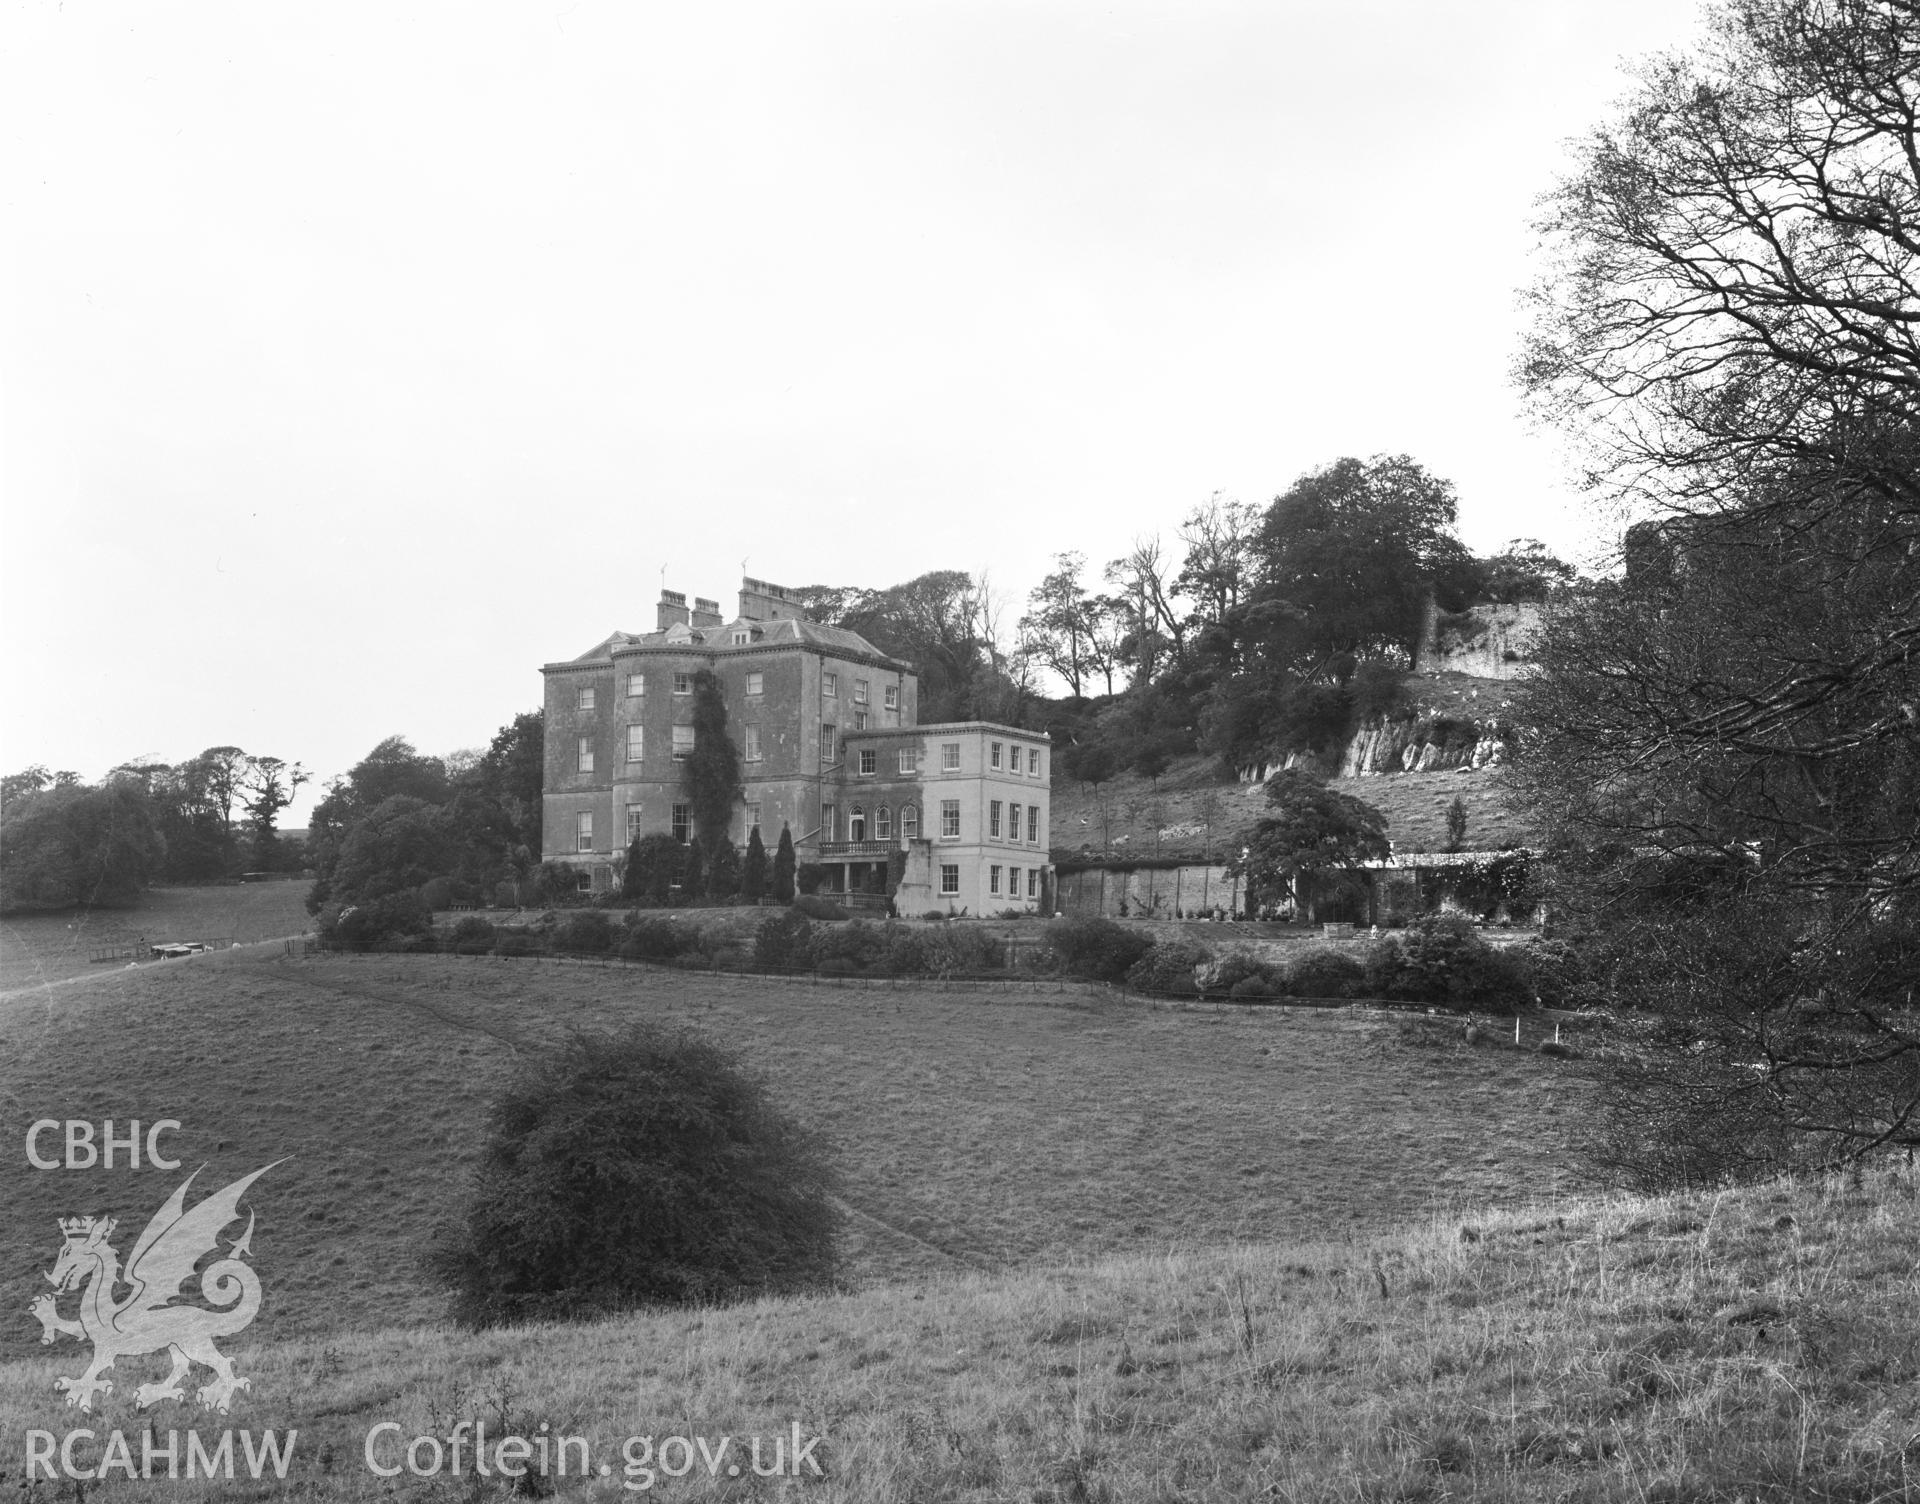 Digital copy of a negative showing exterior view of Penrice Castle.